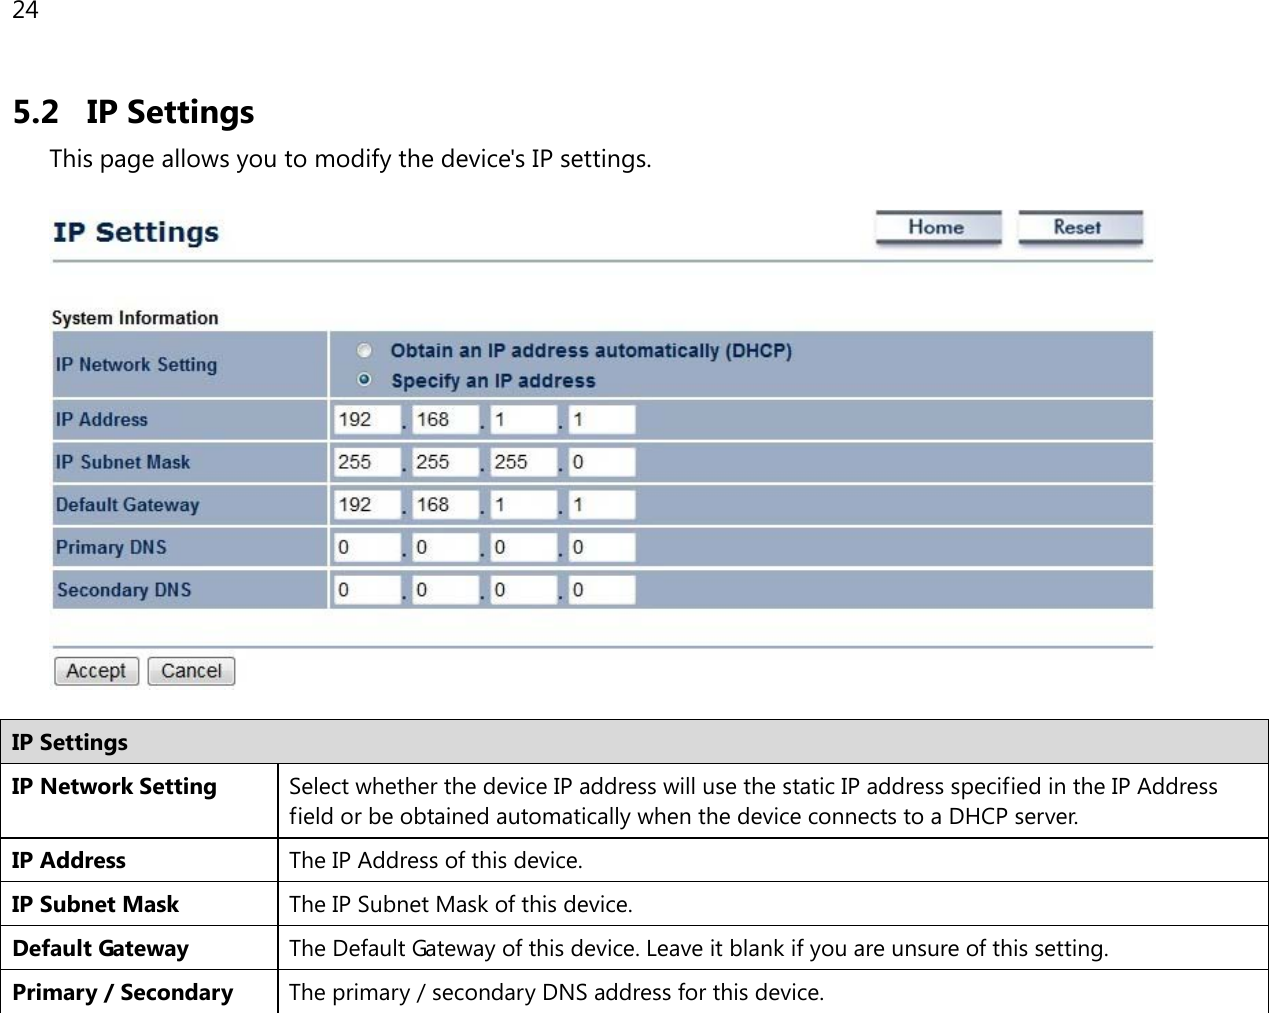 24  5.2 IP Settings This page allows you to modify the device&apos;s IP settings.    IP Settings IP Network Setting Select whether the device IP address will use the static IP address specified in the IP Address field or be obtained automatically when the device connects to a DHCP server. IP Address The IP Address of this device. IP Subnet Mask The IP Subnet Mask of this device. Default Gateway The Default Gateway of this device. Leave it blank if you are unsure of this setting. Primary / Secondary  The primary / secondary DNS address for this device. 